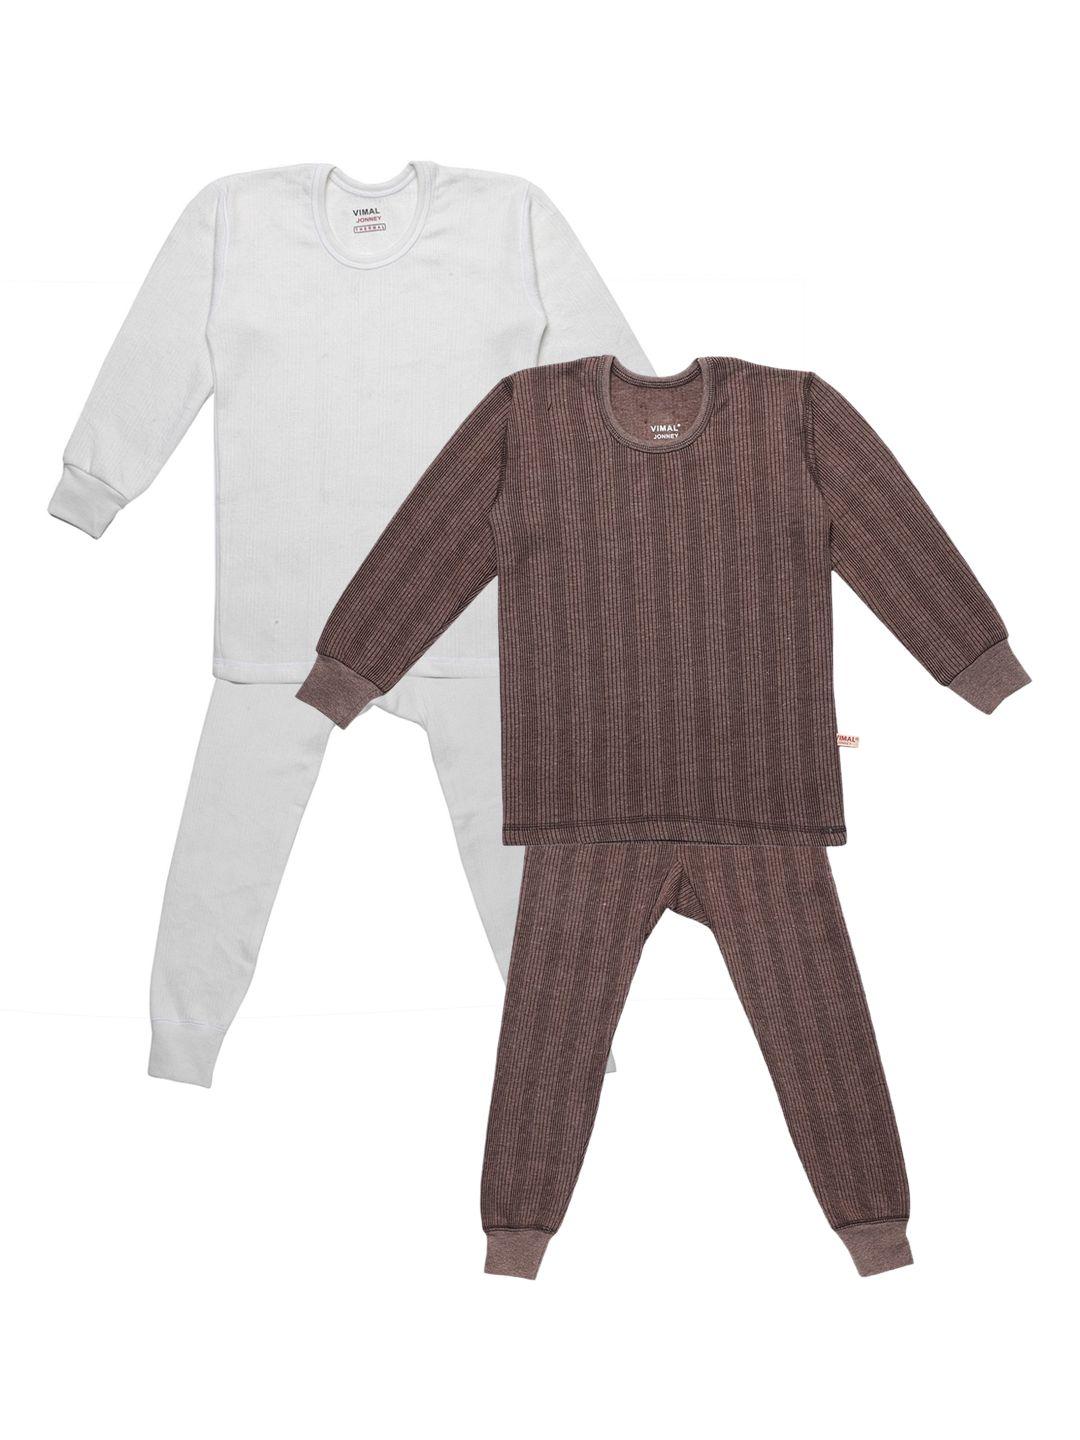 vimal-jonney-kids-pack-of-2-striped-thermal-top-and-bottom-set